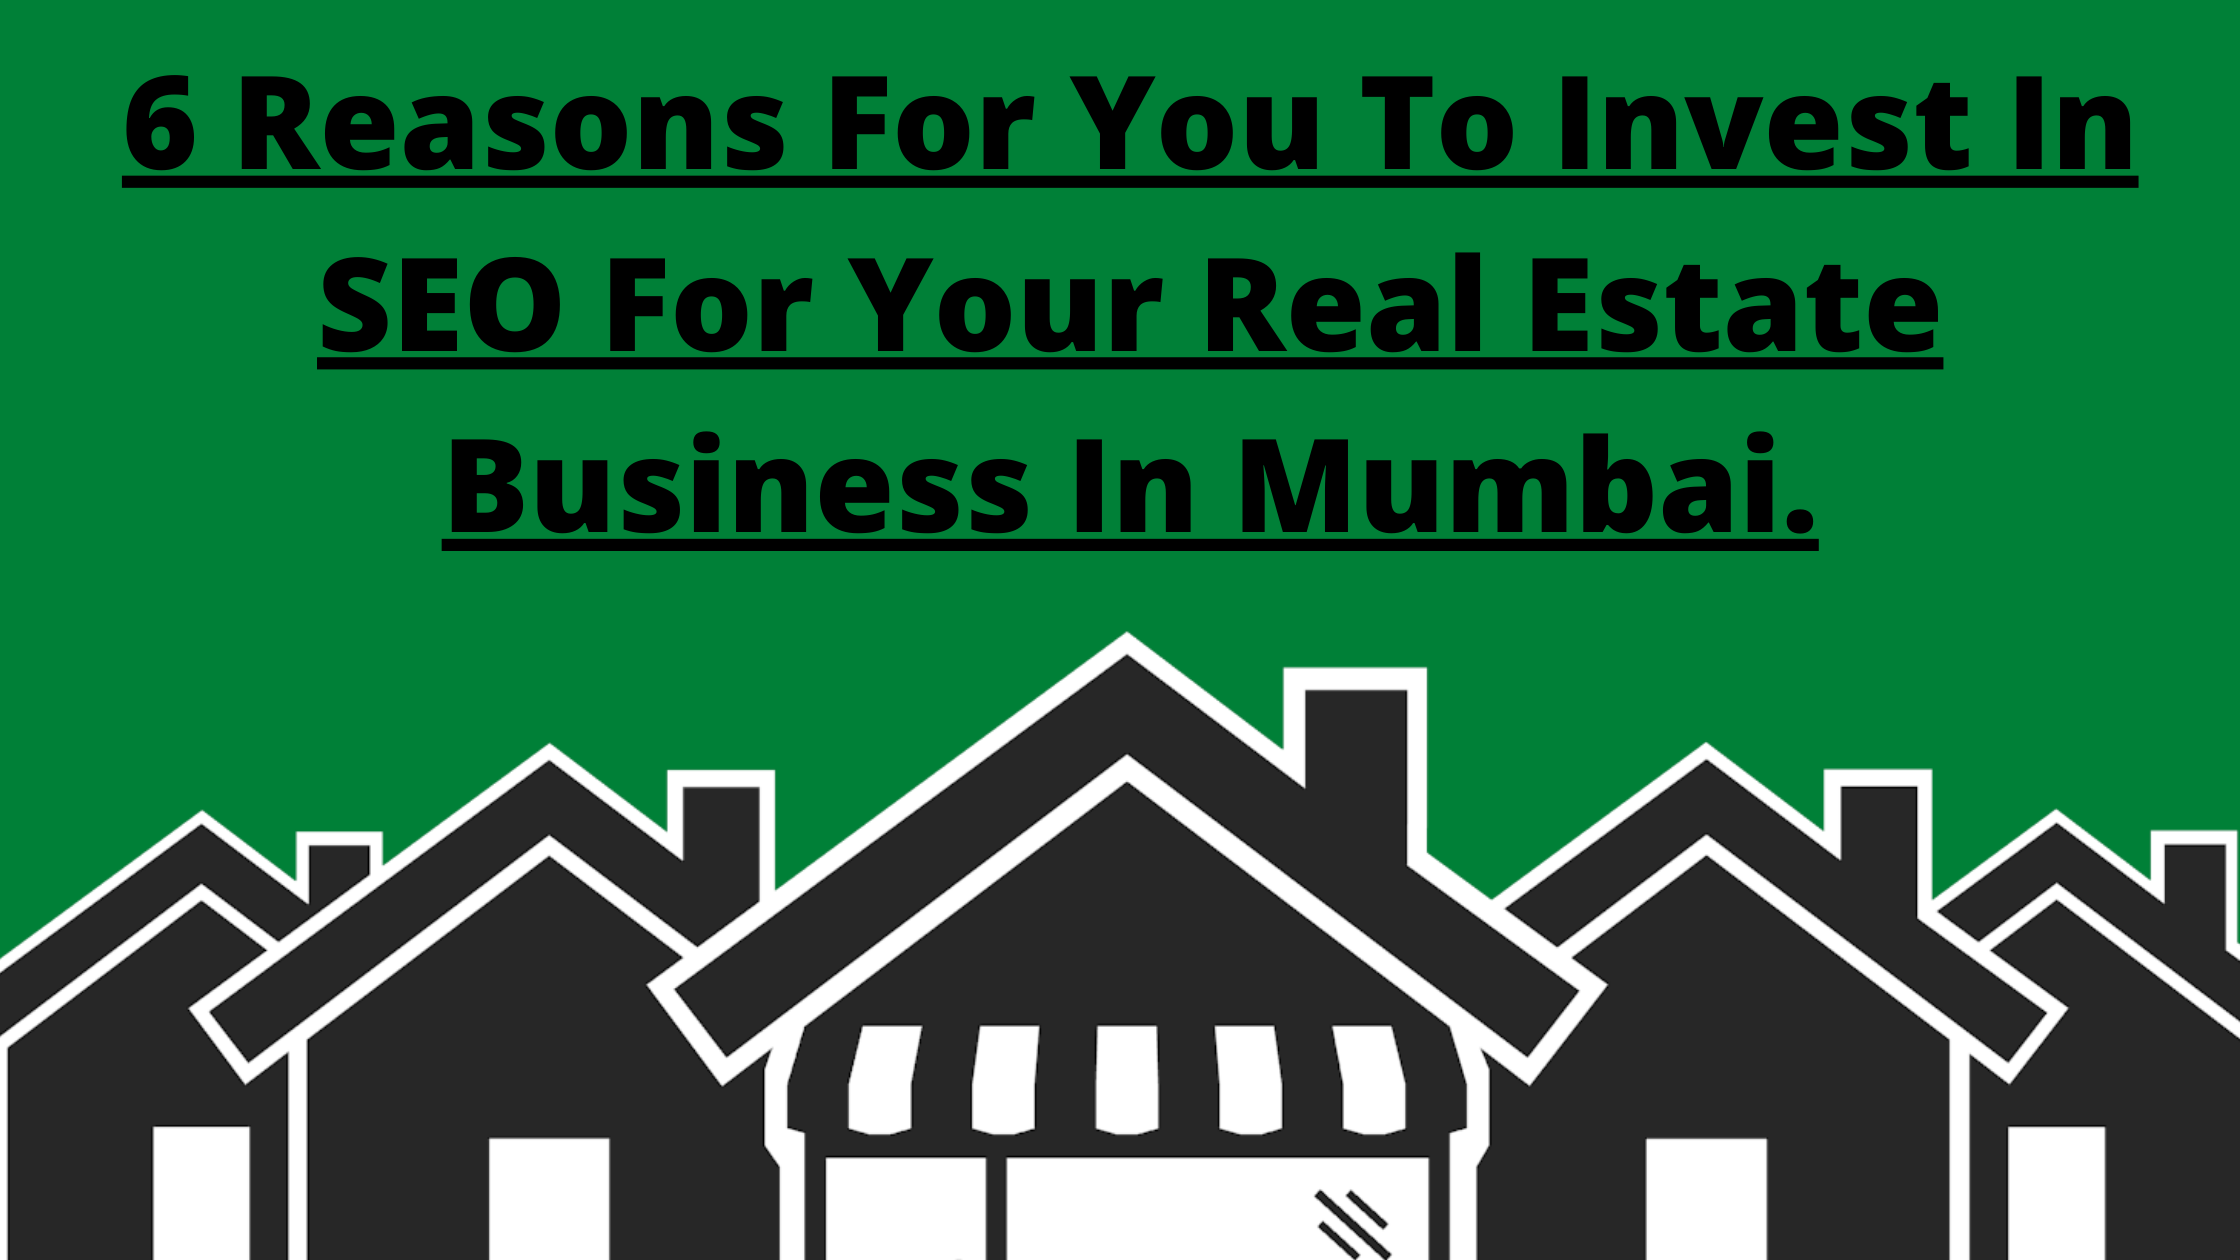 6 Reasons For You To Invest In SEO For Your Real Estate Business